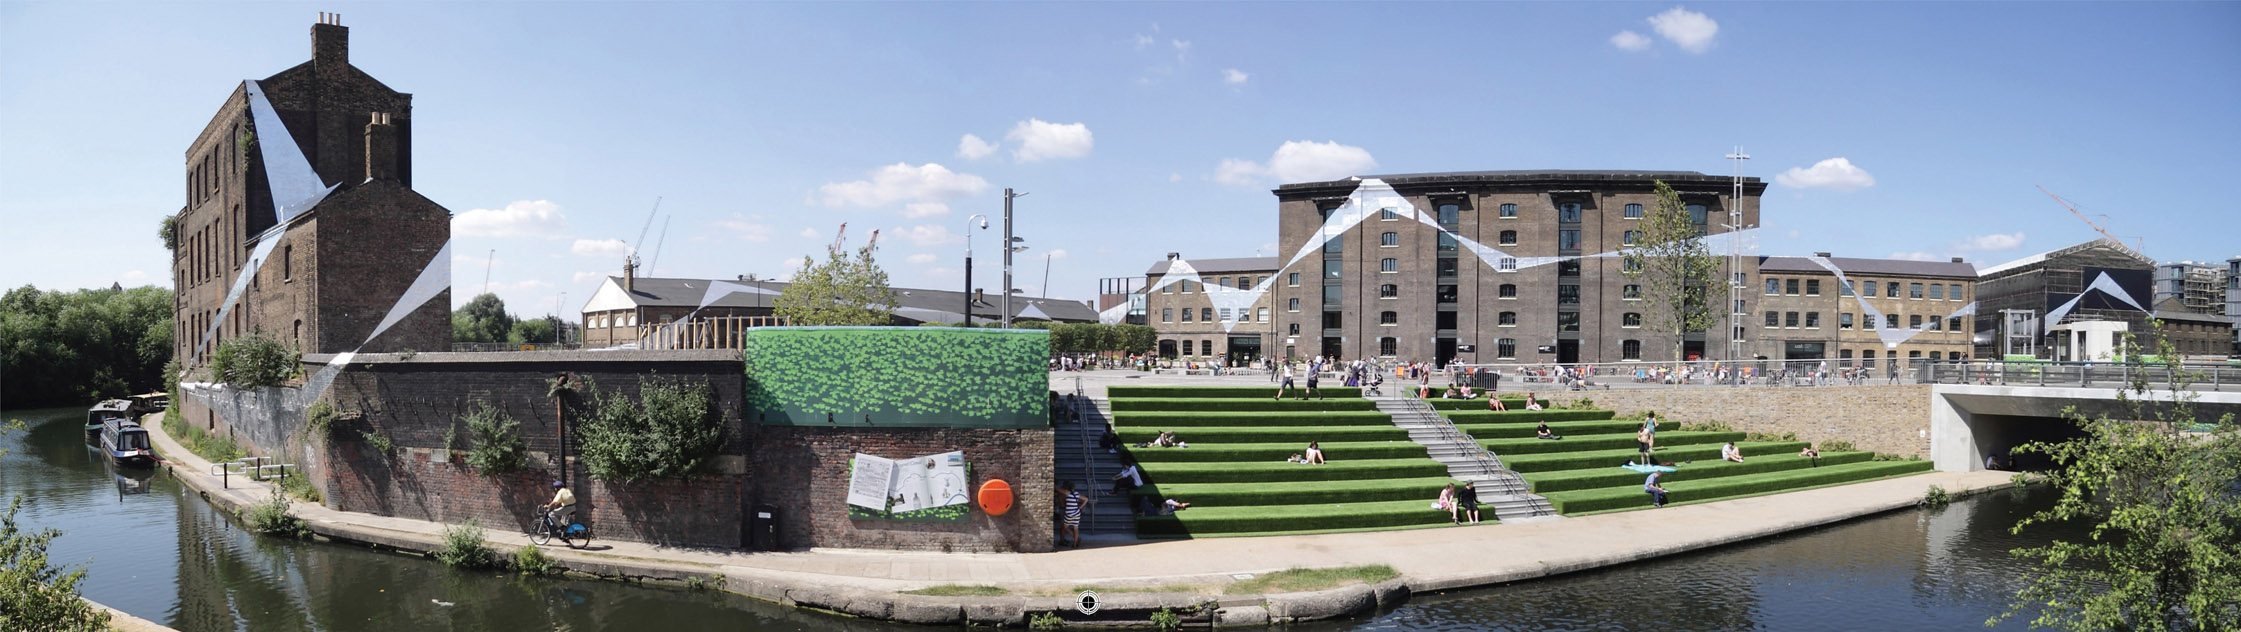 Figure 9.6: The Granary Building, now University of the Arts London, art installation and canalside steps.